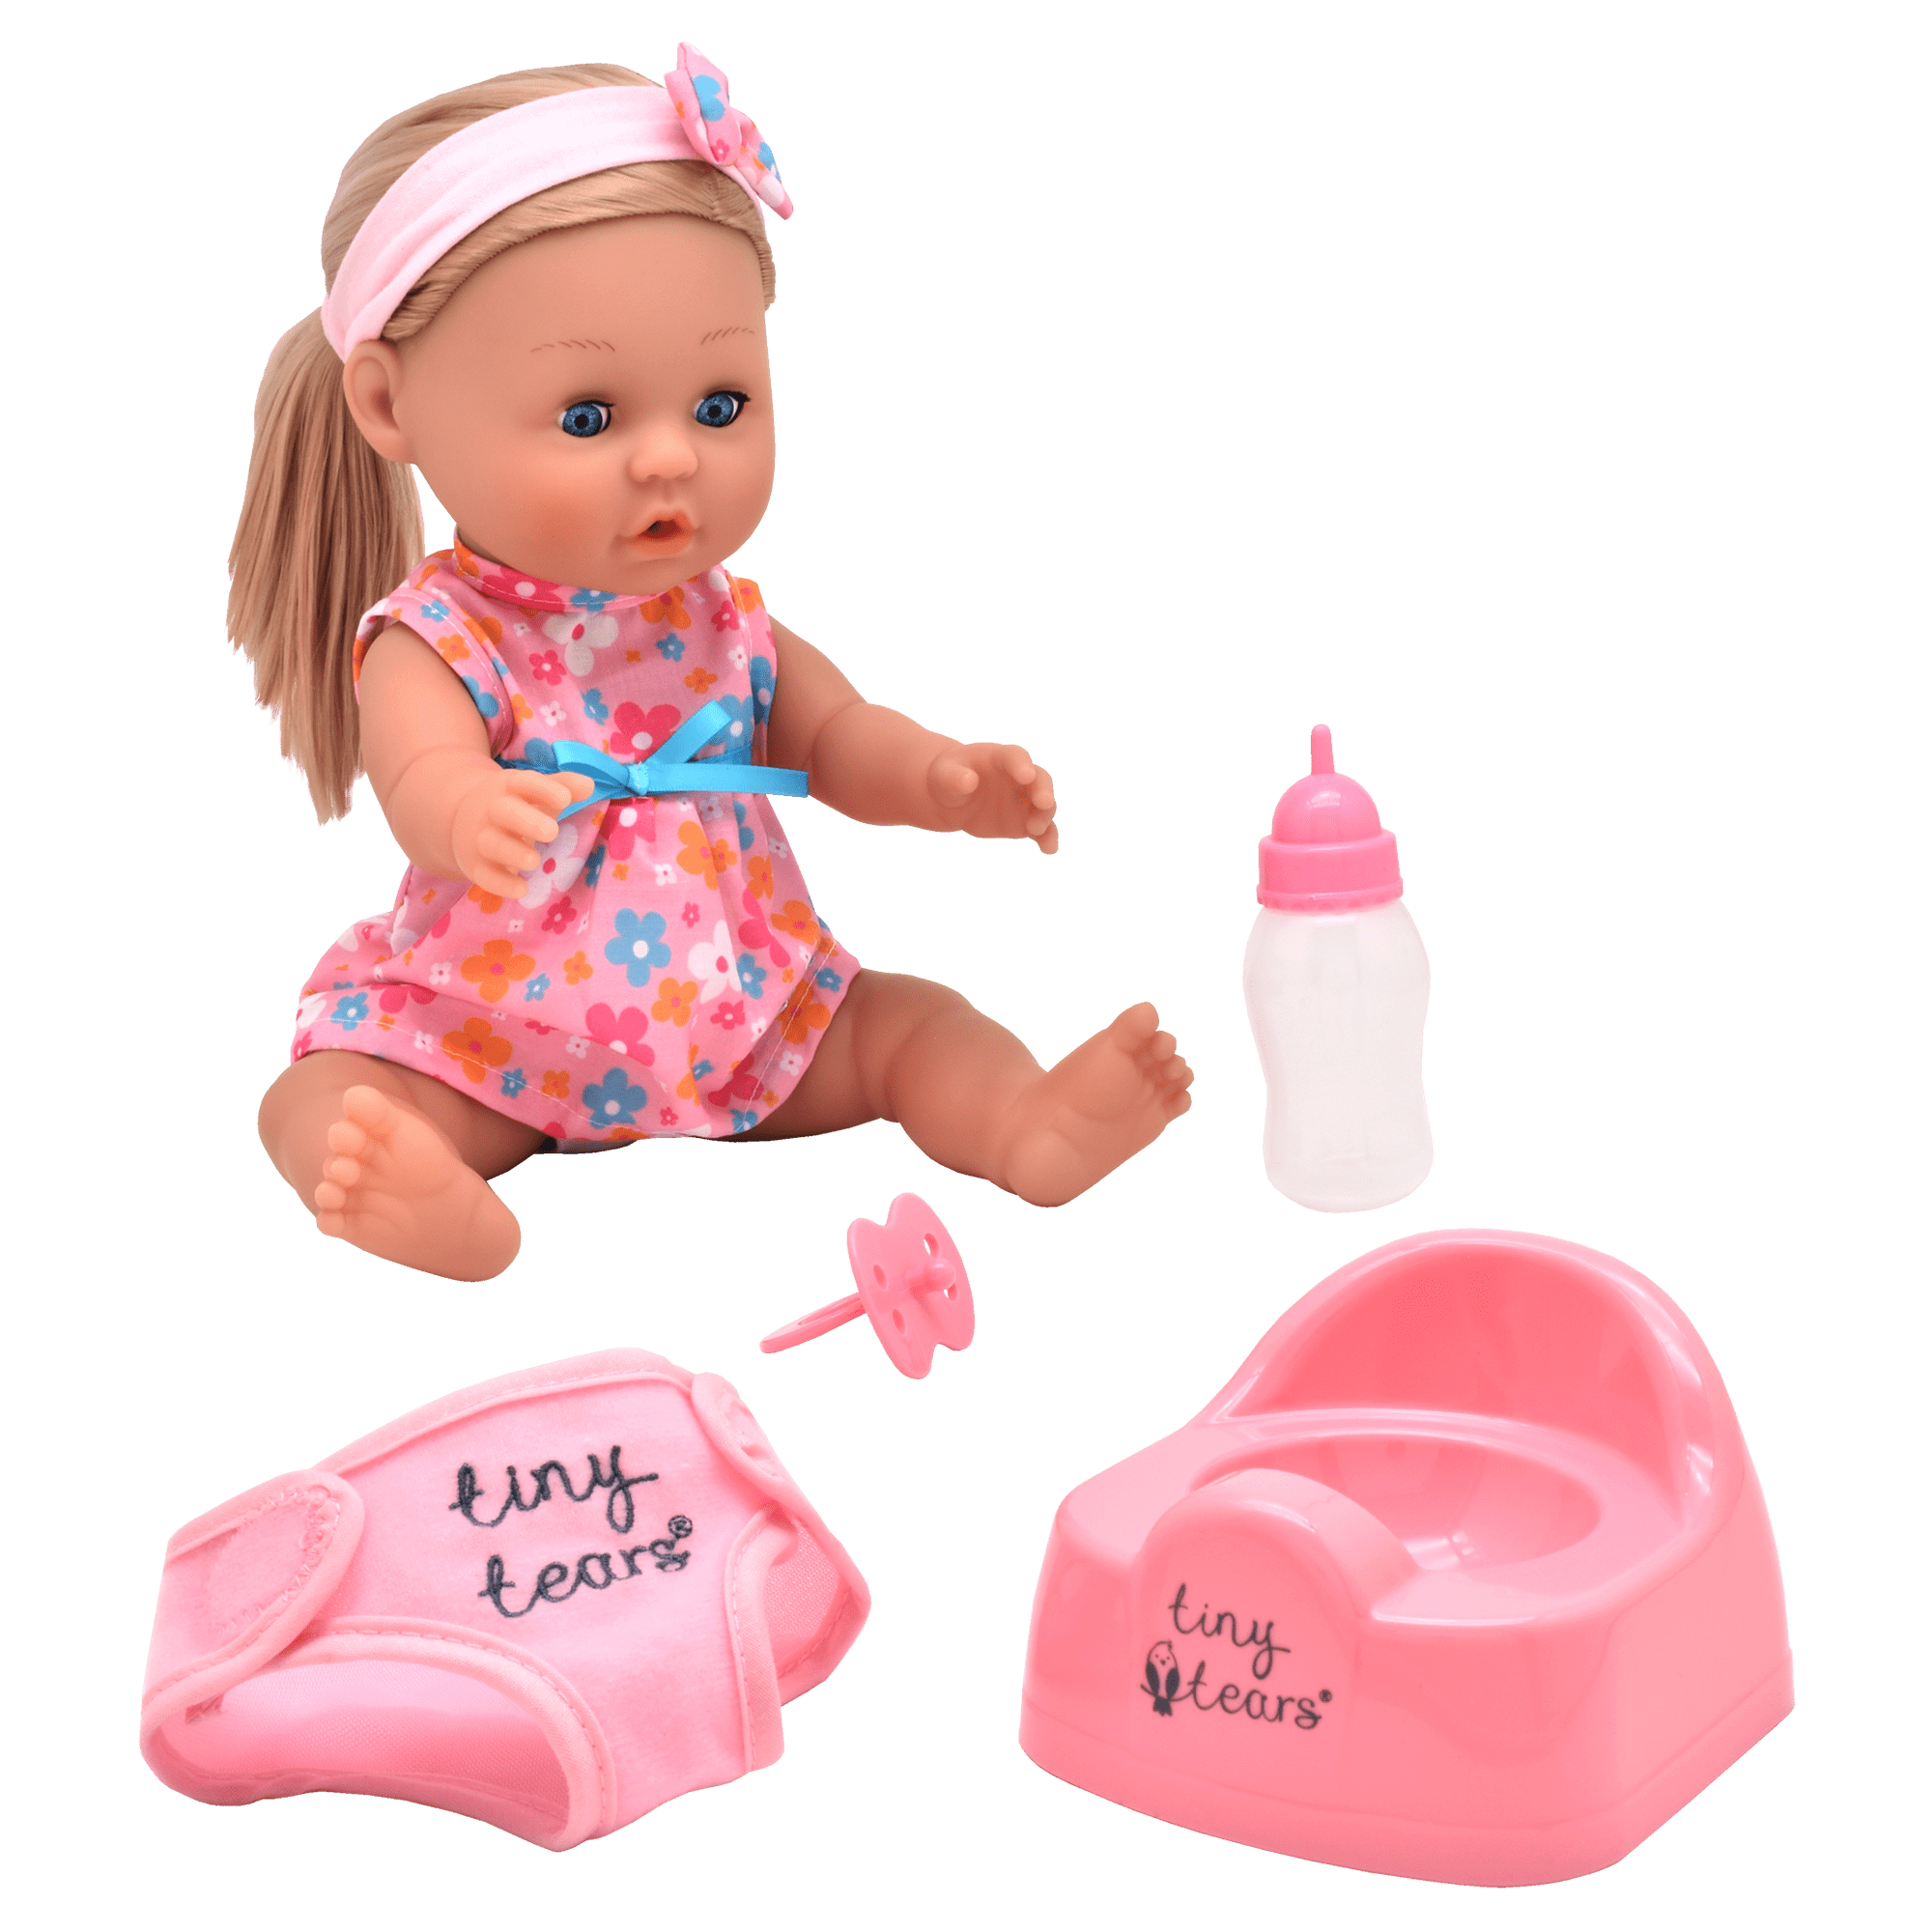 Drinking Crying & Wetting by John Adams NEW CLASSIC TINY TEARS BABY DOLL 